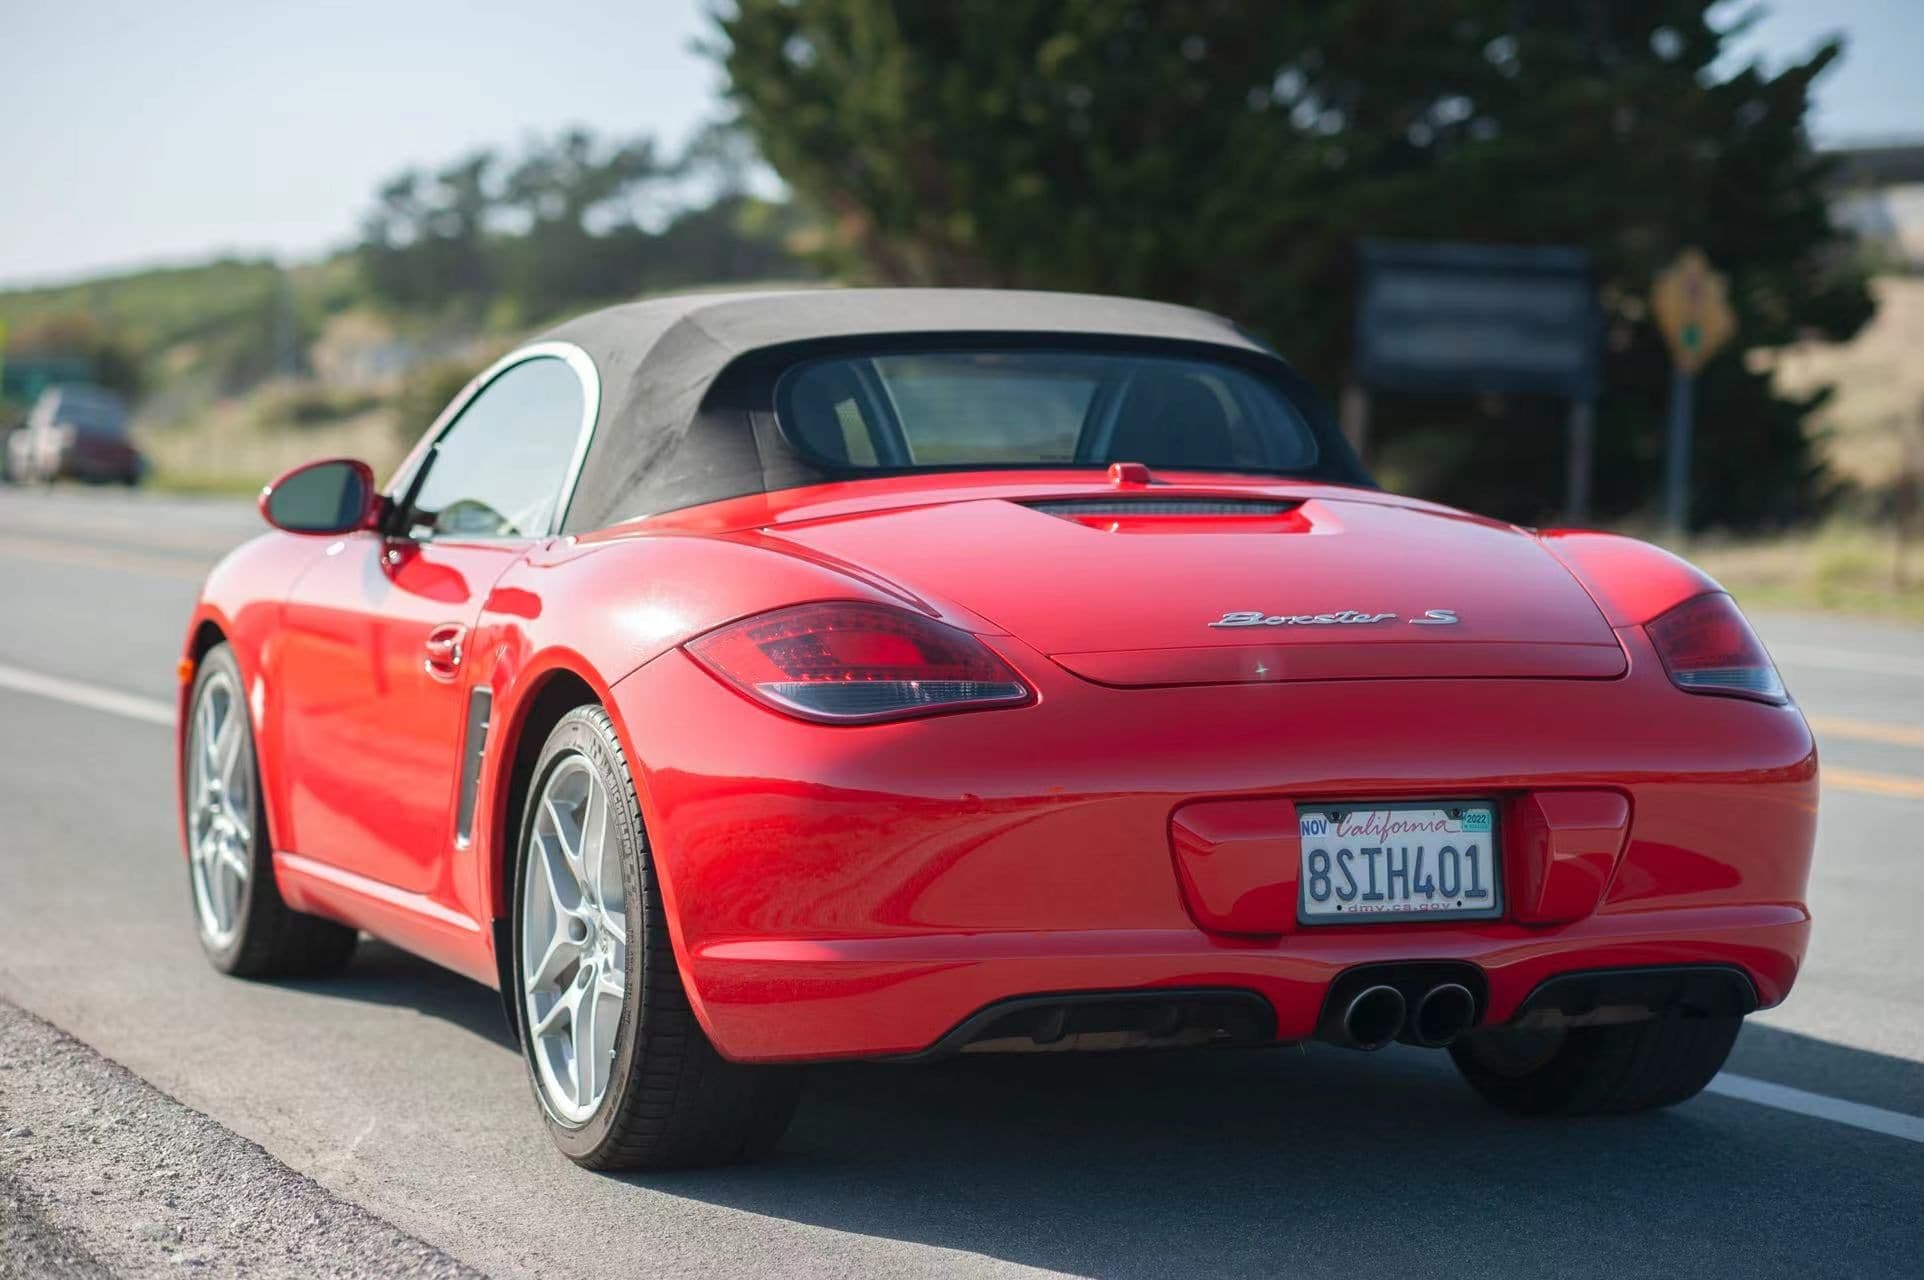 2009 Porsche Boxster - 2009 Boxster S 987.2 - Used - VIN WP0CB29809U730427 - 121,000 Miles - 6 cyl - 2WD - Manual - Convertible - Red - San Mateo, CA 94403, United States